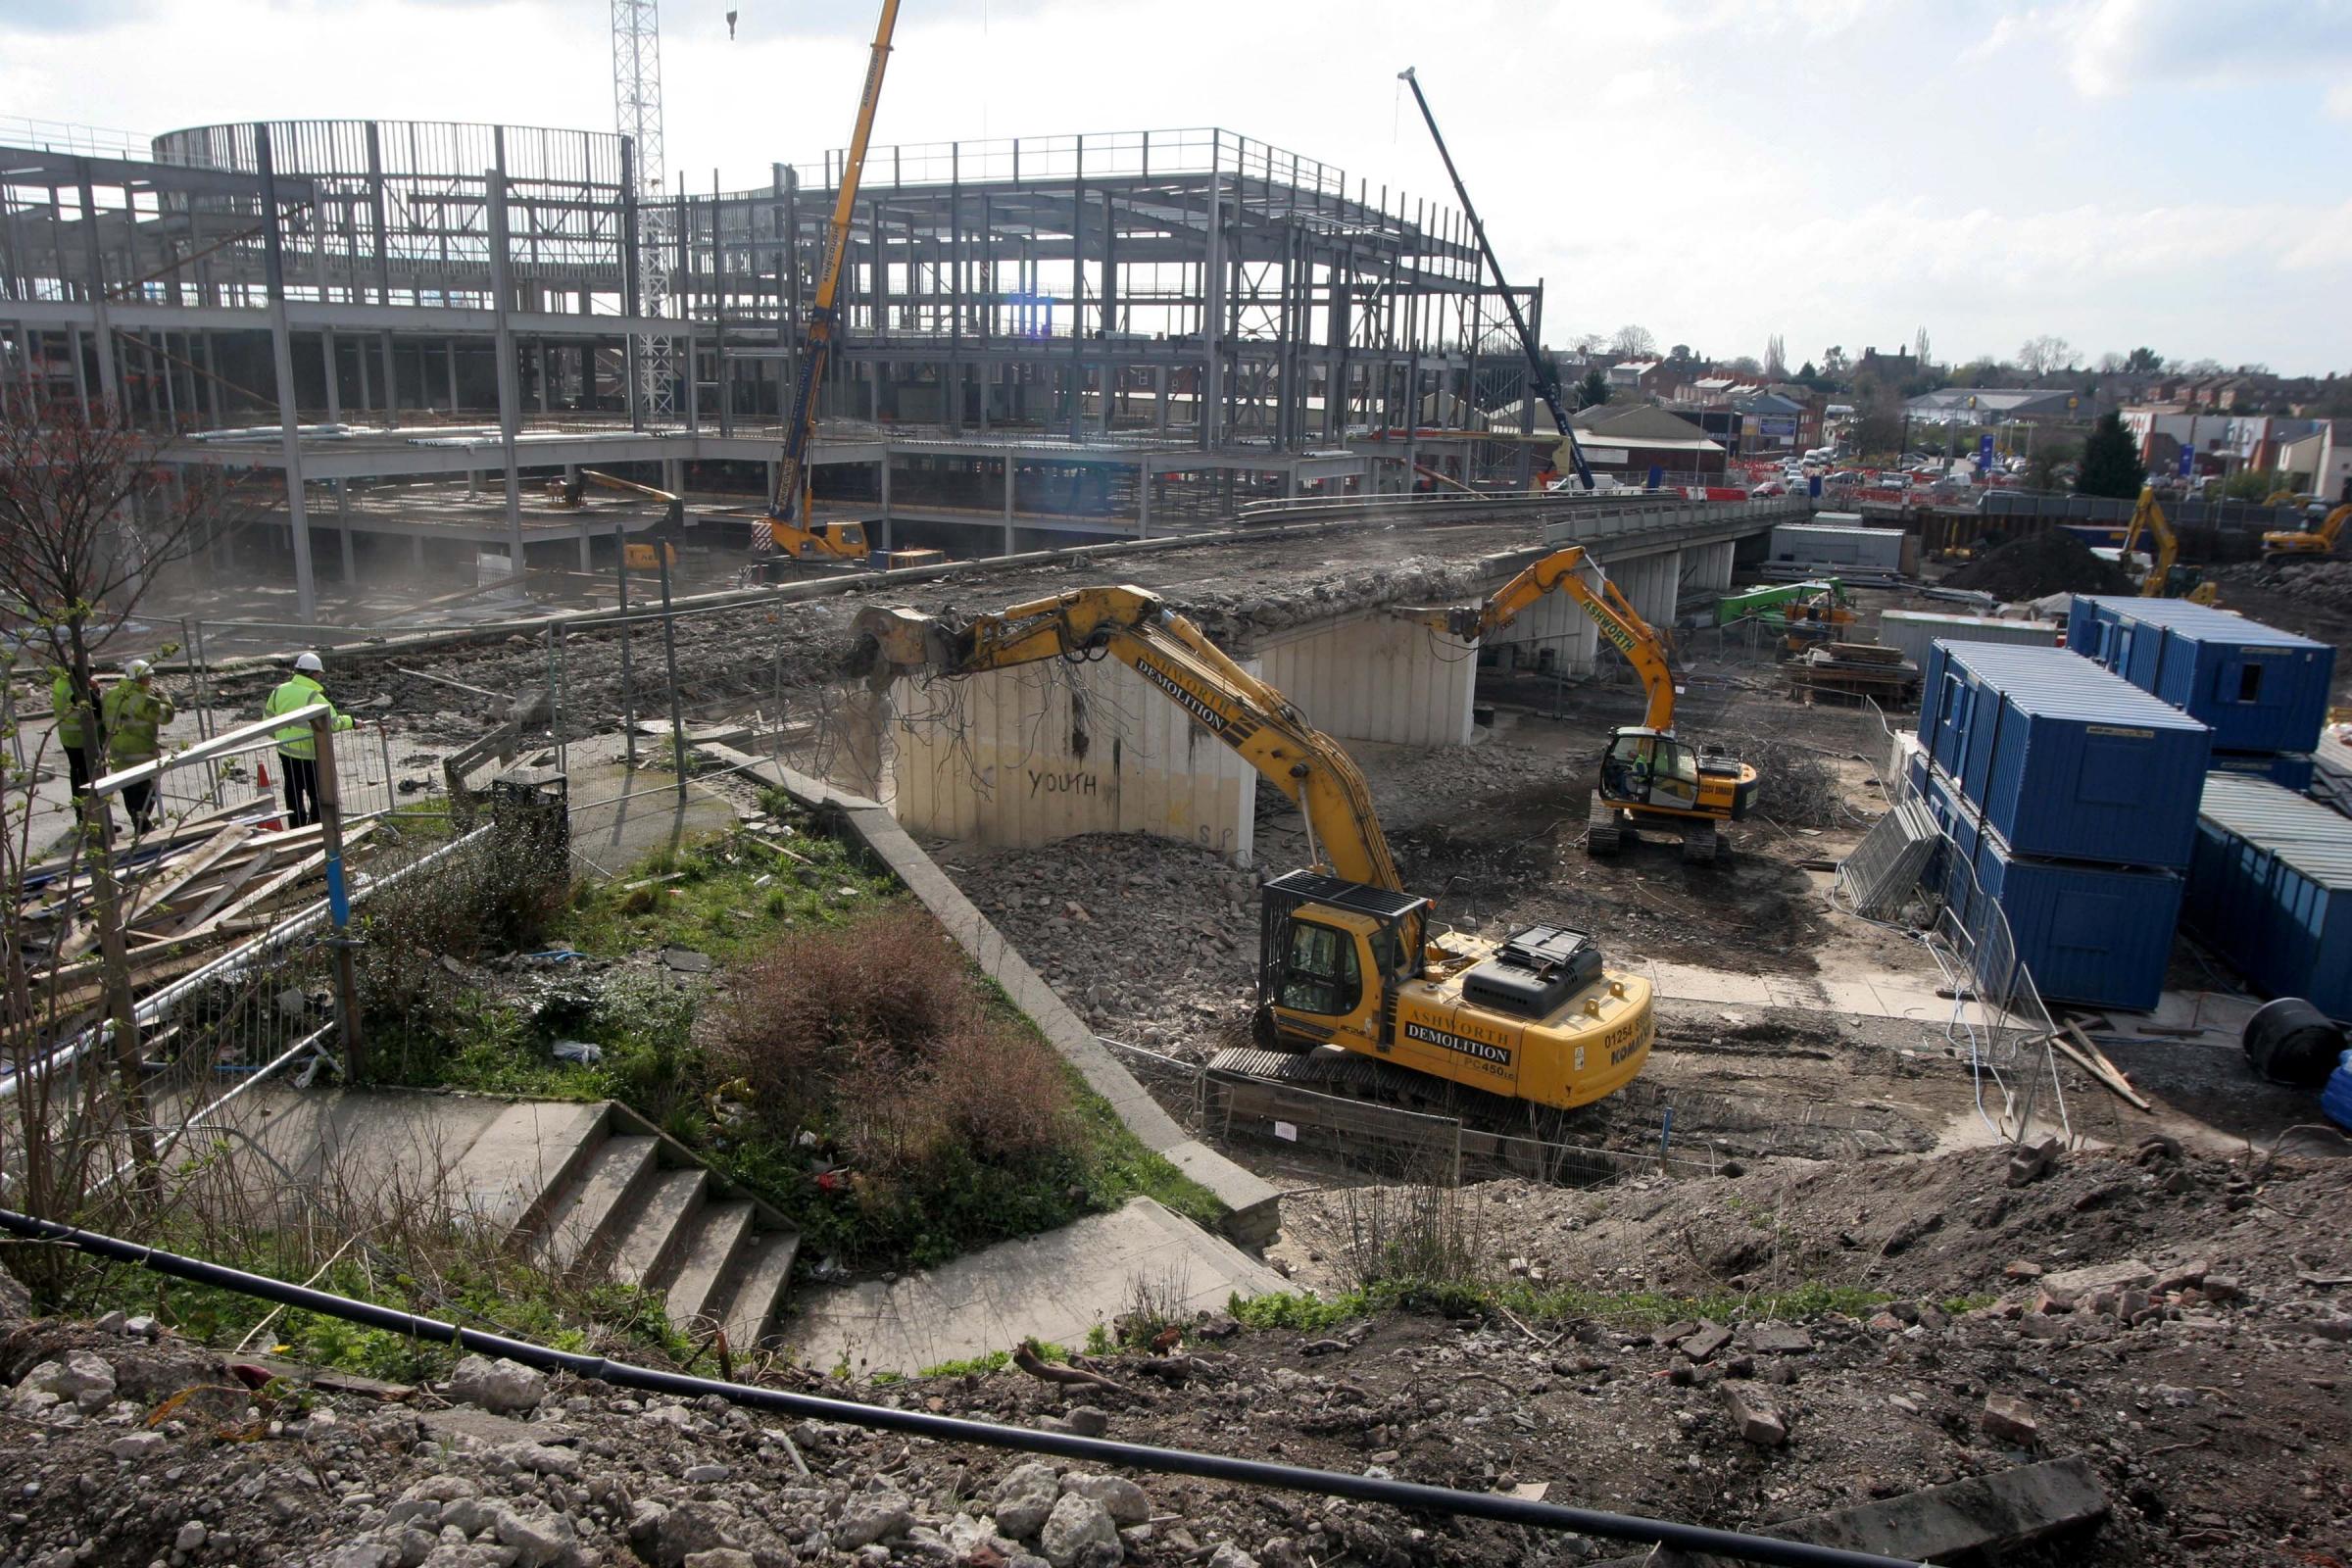 Demolition of the flyover bridge at the Eagles Meadow construction site, March 2007.